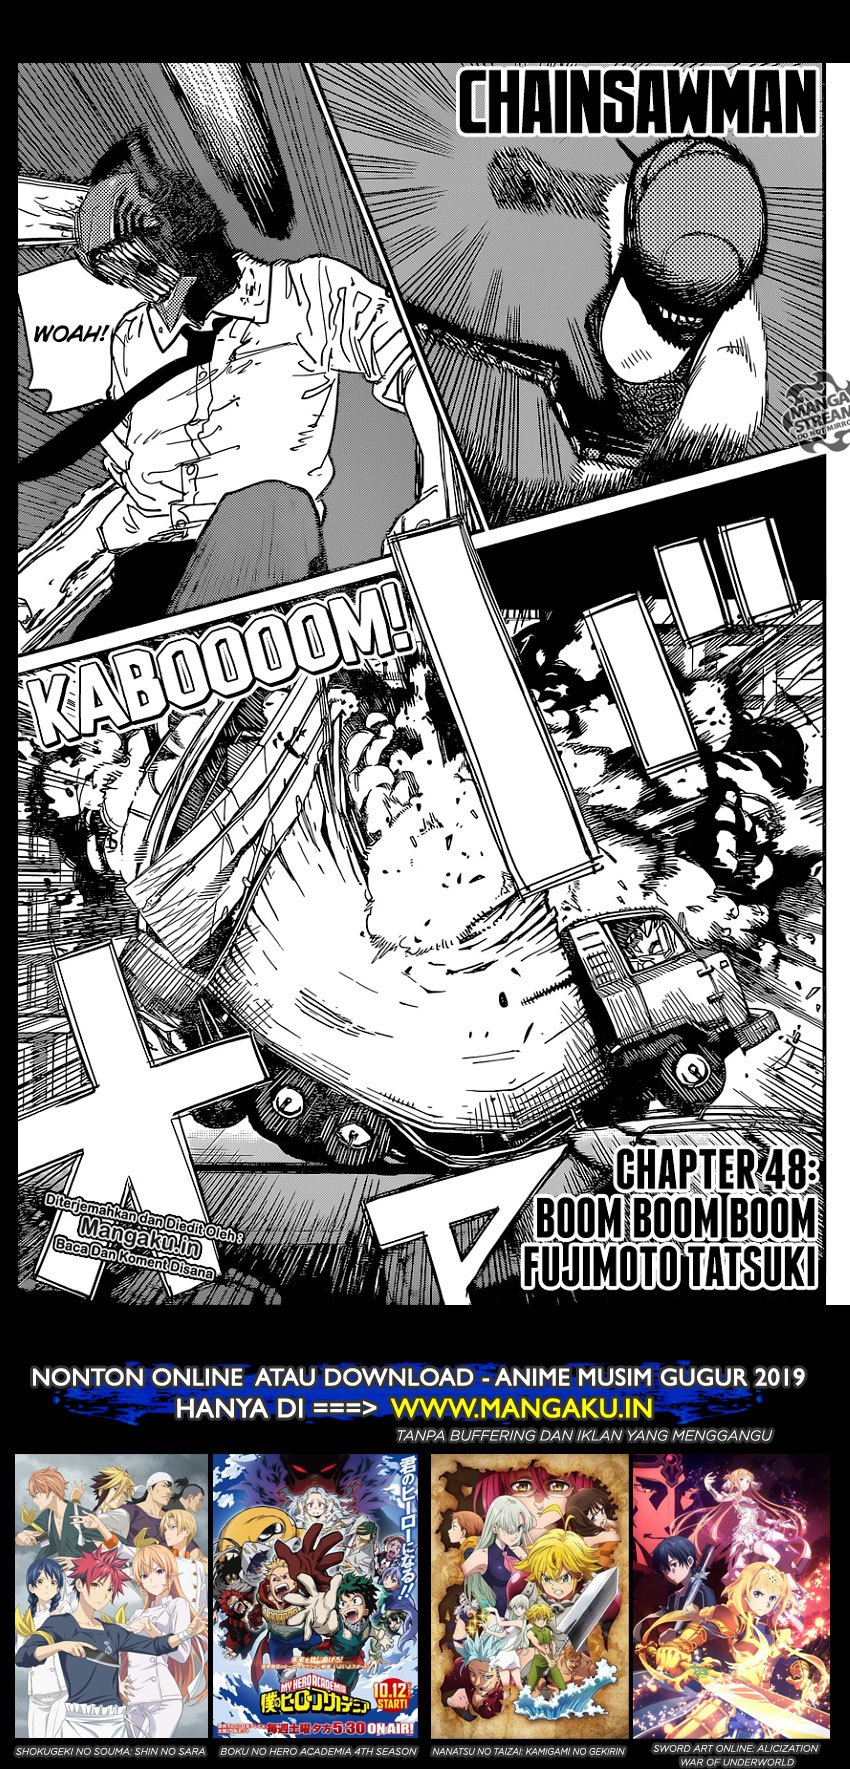 Chainsaw Man Chapter 48